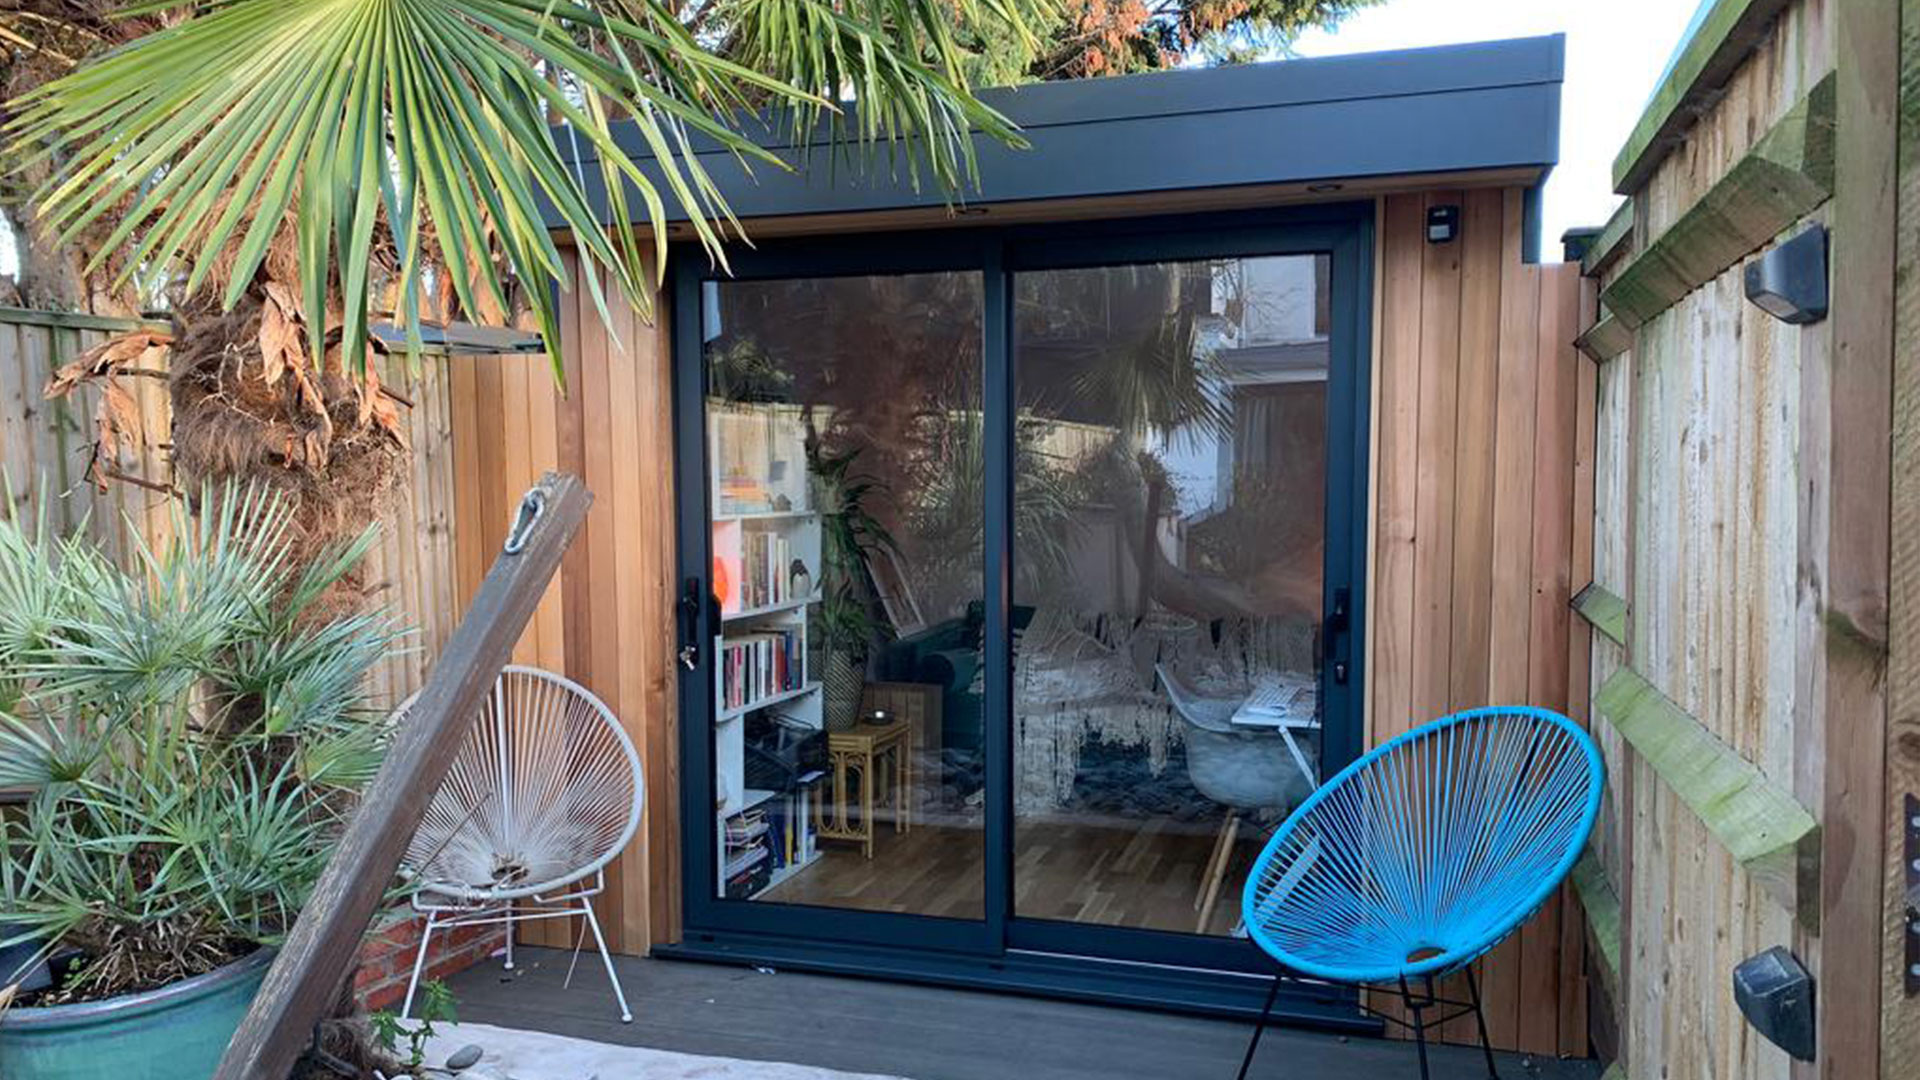 How Can I Build a Bespoke Garden Room in a Small Space?